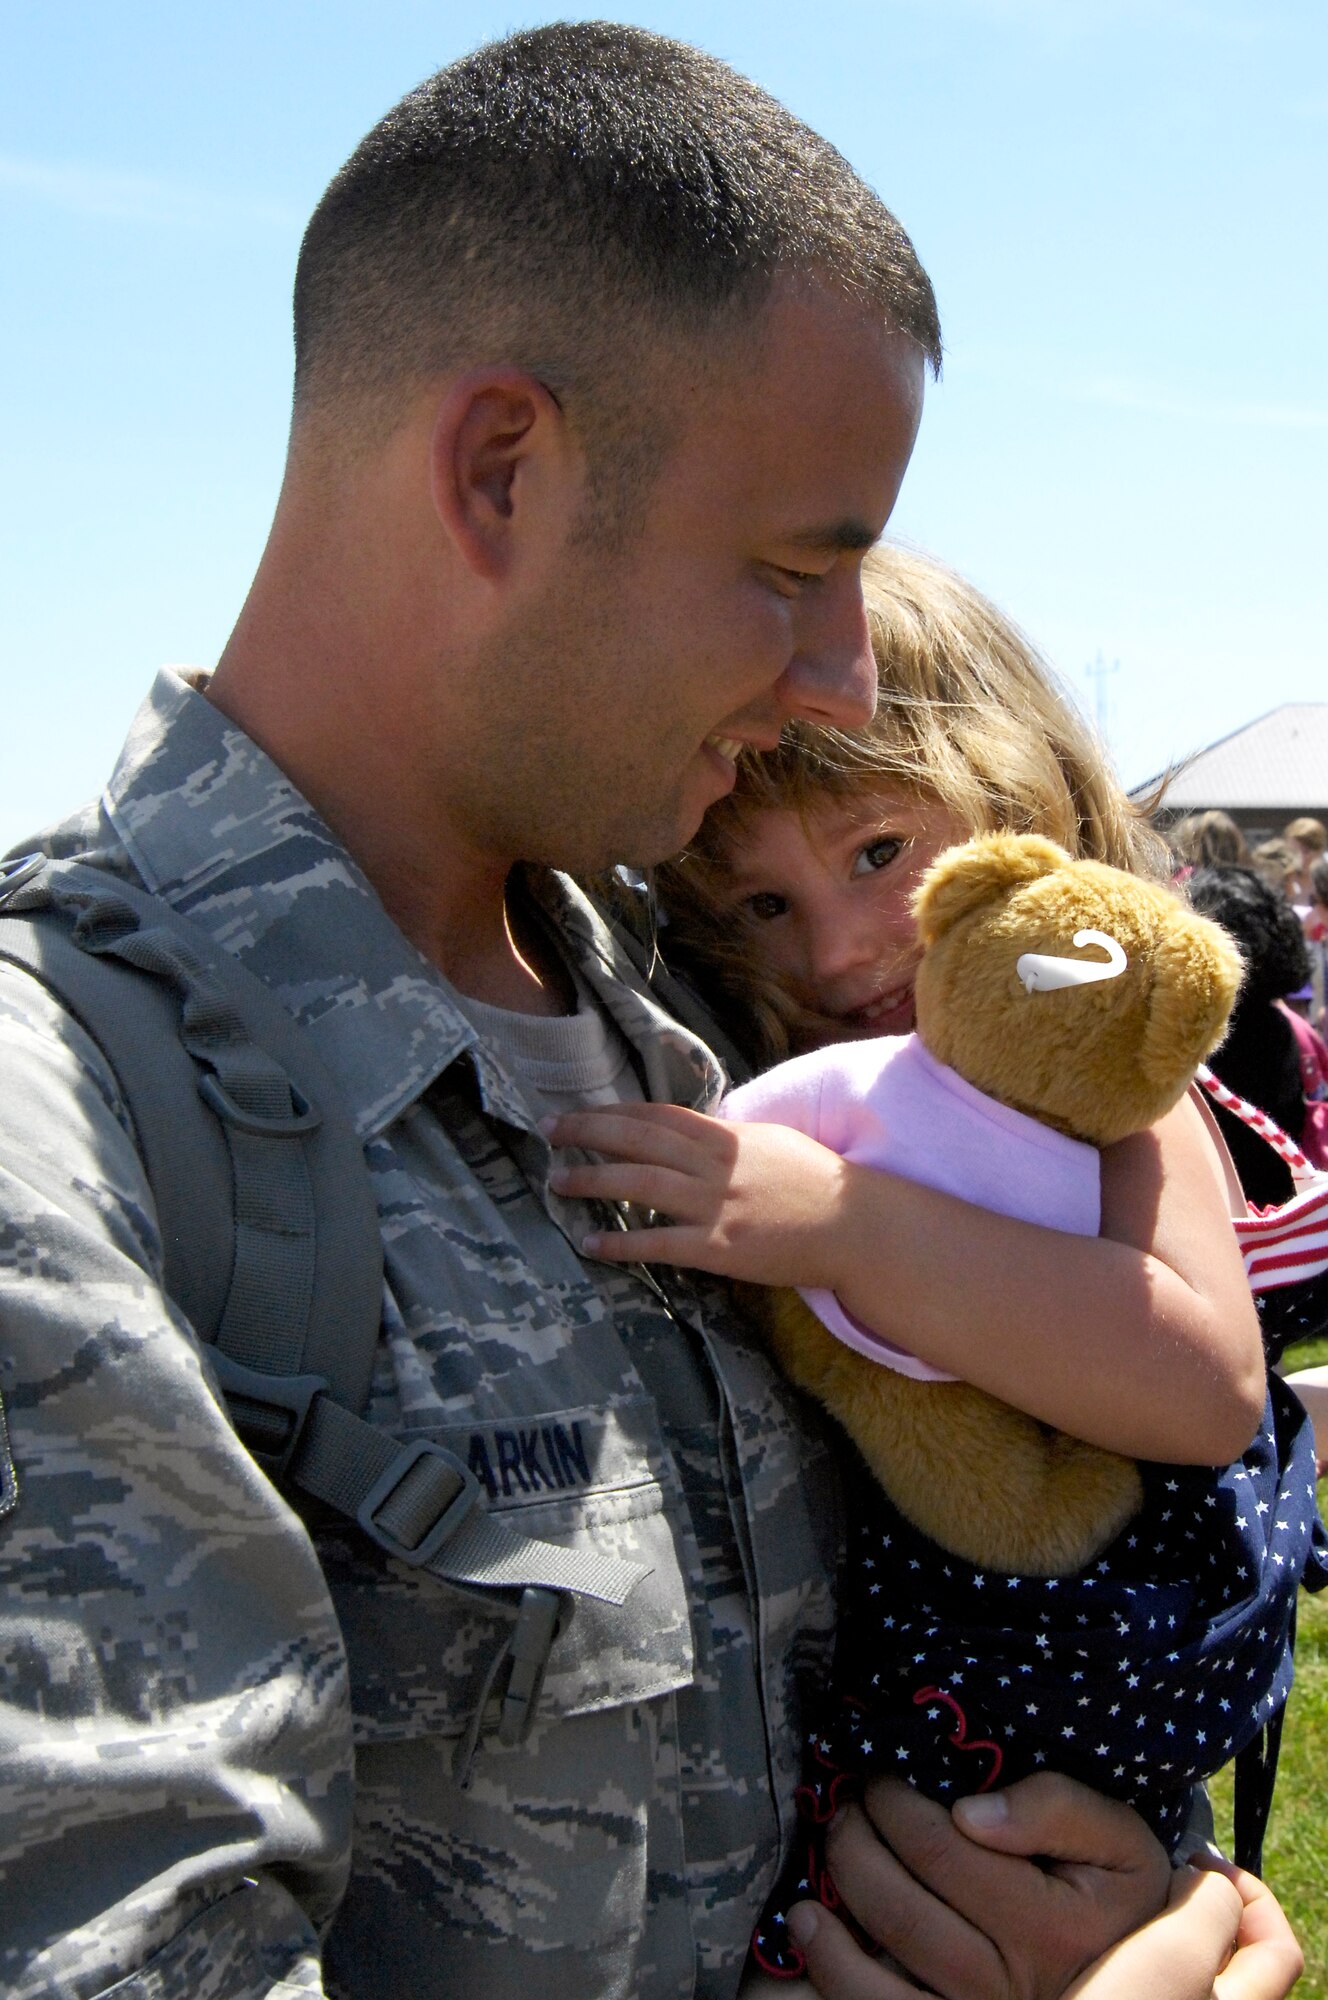 WHITEMAN AIR FORCE BASE, Mo. - Staff Sgt. Nicholas Larkin, 509th Munitions Squadron, holds his daughter, Laney, June 4 after returning from a four-month deployment to Andersen AFB, Guam. More than 200 Airmen deployed in support of the B-2 Spirit's continuing bomber presence in the Pacific. (U.S. Air Force photo/Senior Airman Jason Barebo)